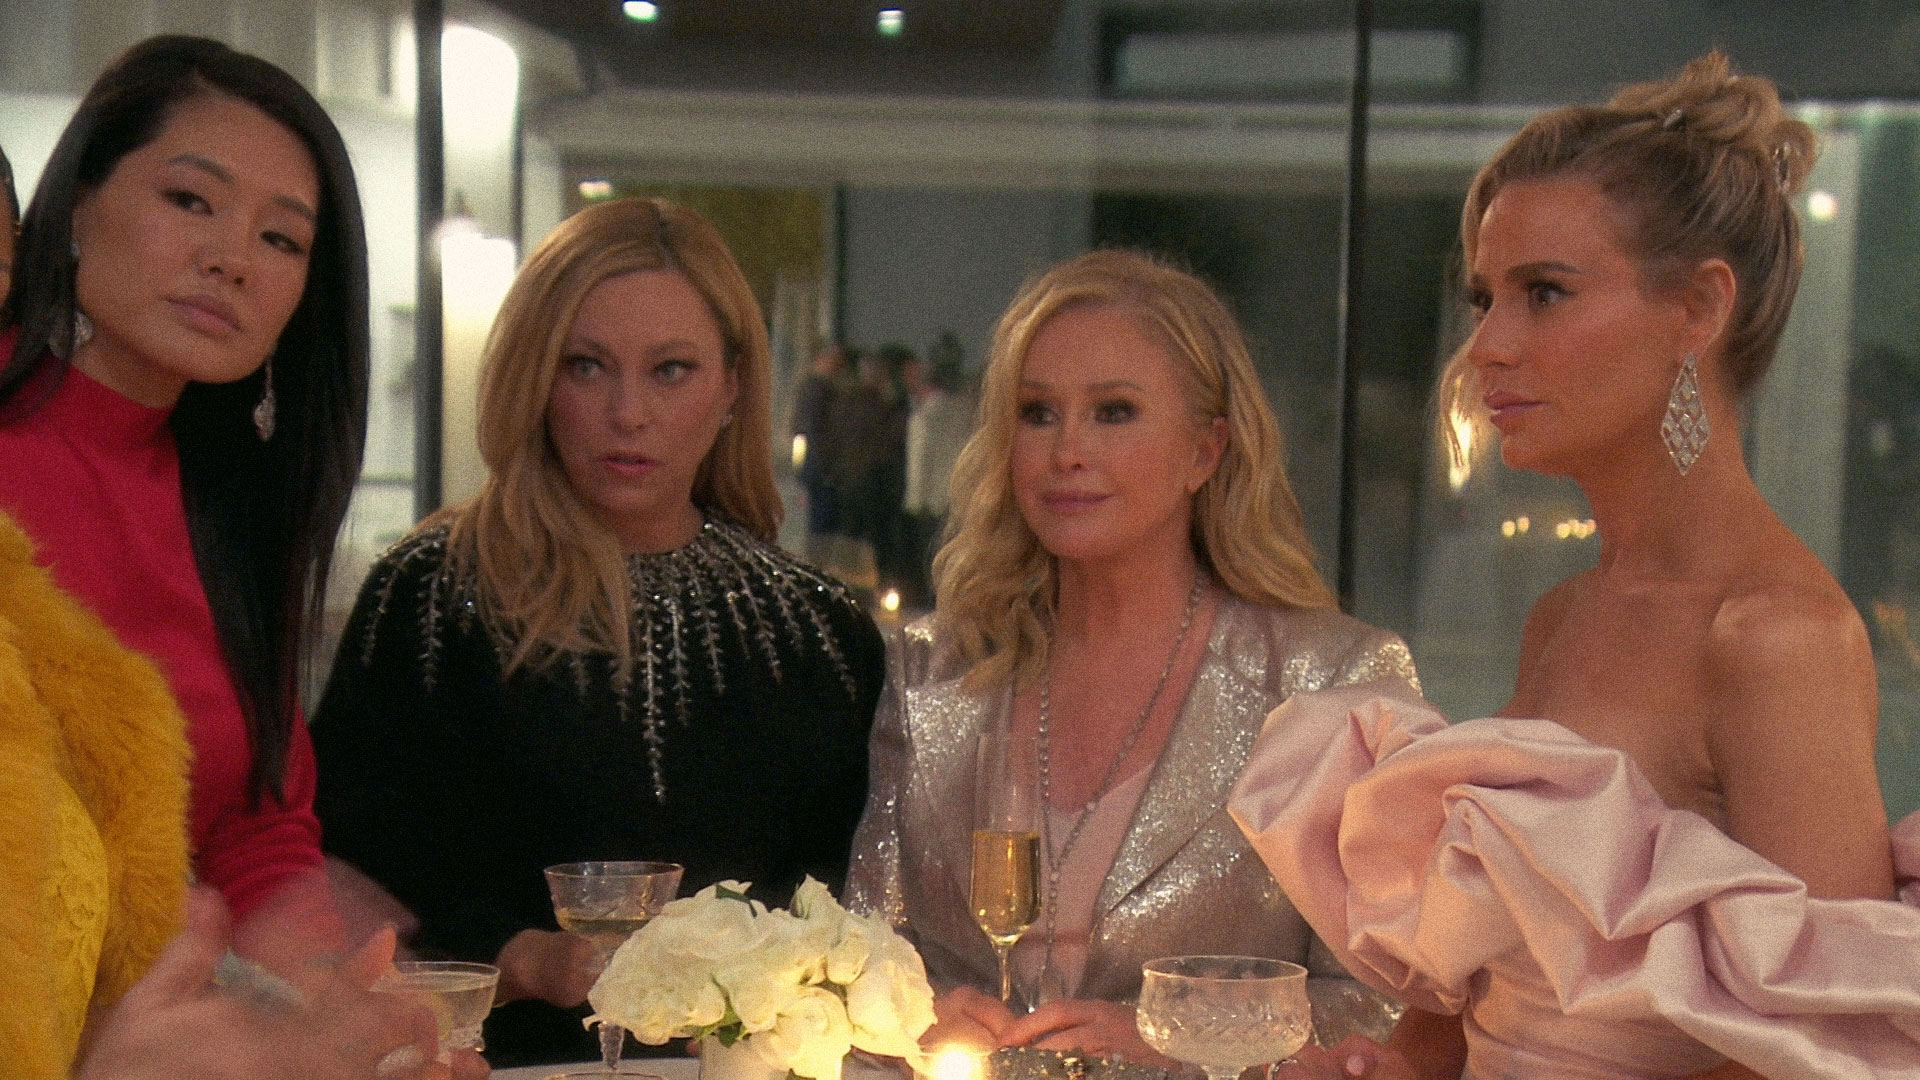 RHOBH The Real Housewives of Beverly Hills S11E17 saison 11 épisode 17 A Tale of Two Accidents